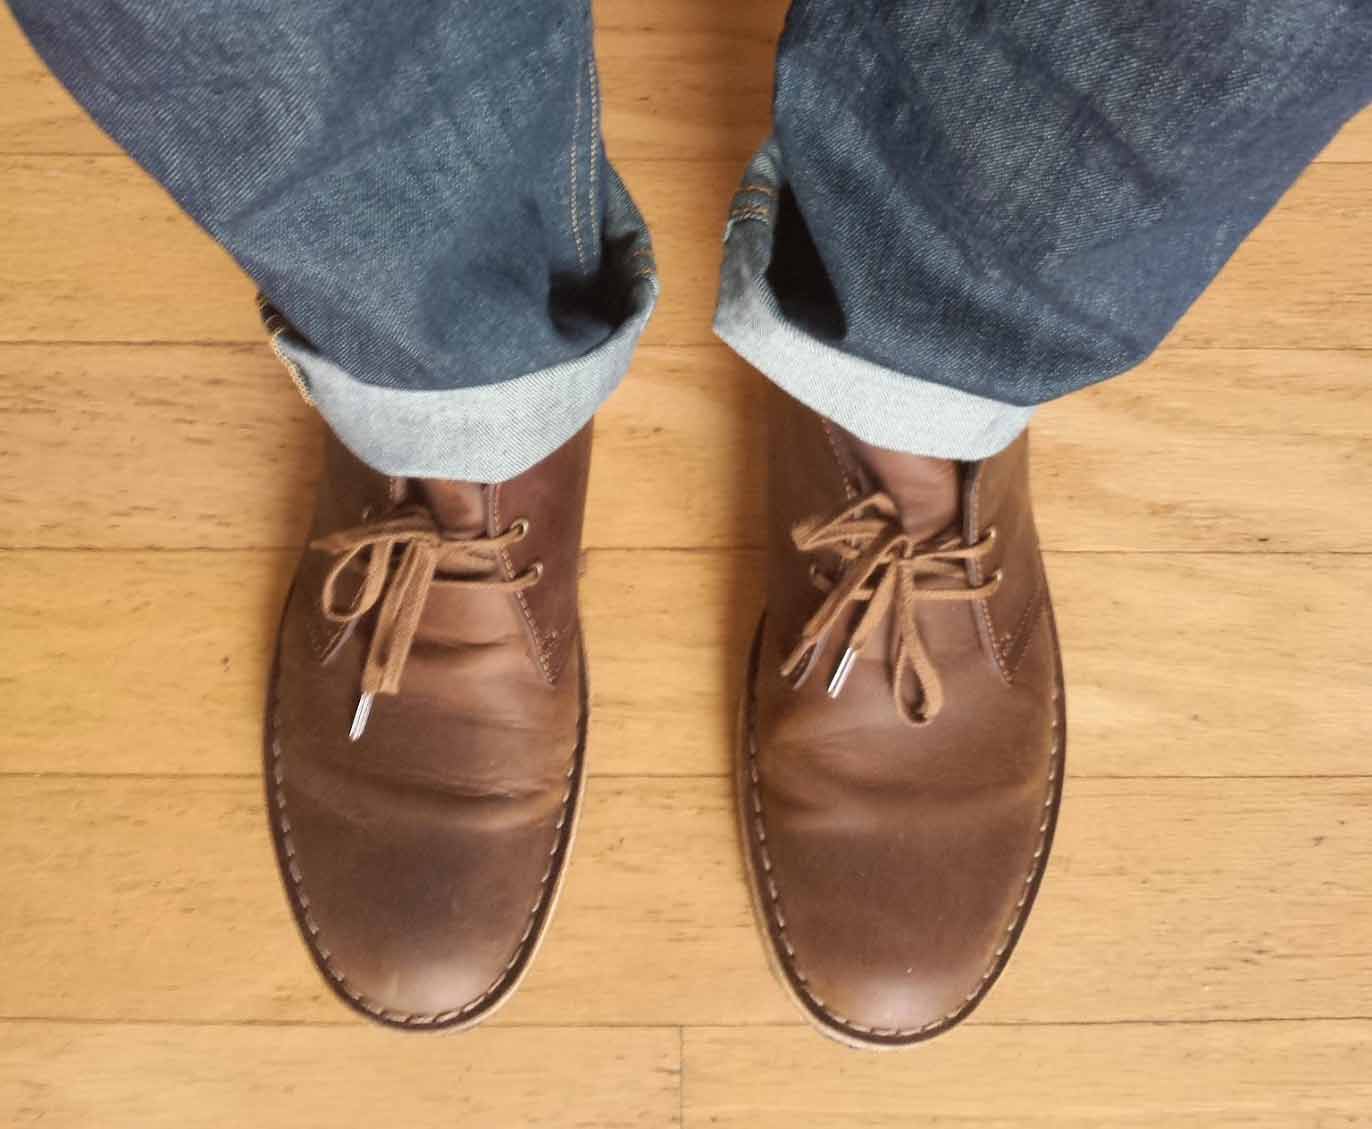 clarks desert boot jeans top down view